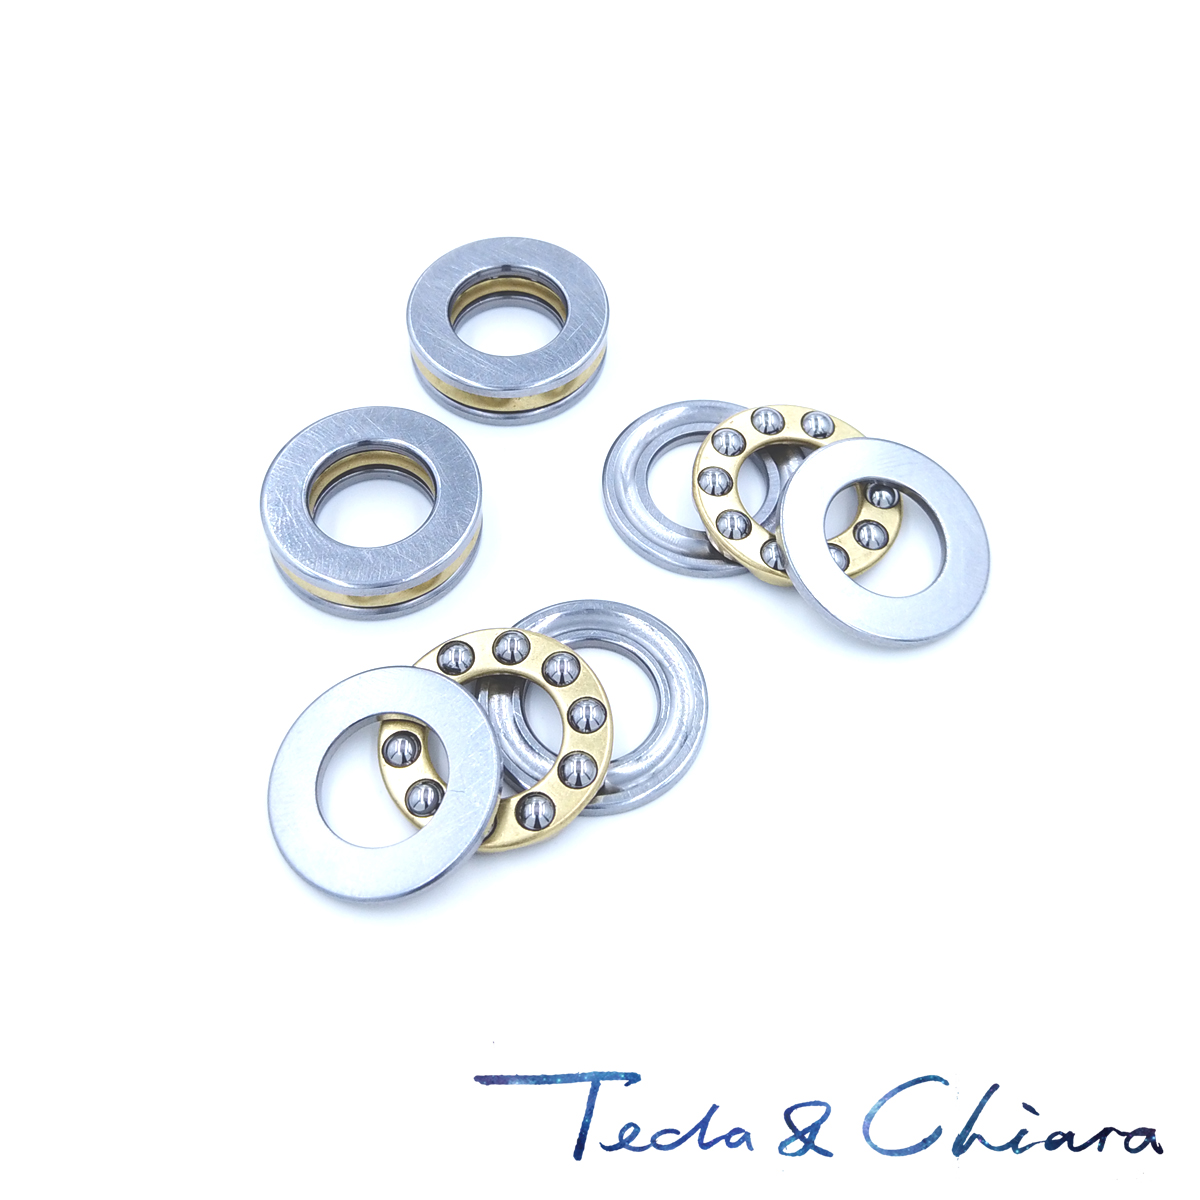 1Pc / 1Piece F5-12M 5 x 12 x 4 mm Axial Ball Thrust Bearing 3-Parts * 3-in-1 Plane High Quality